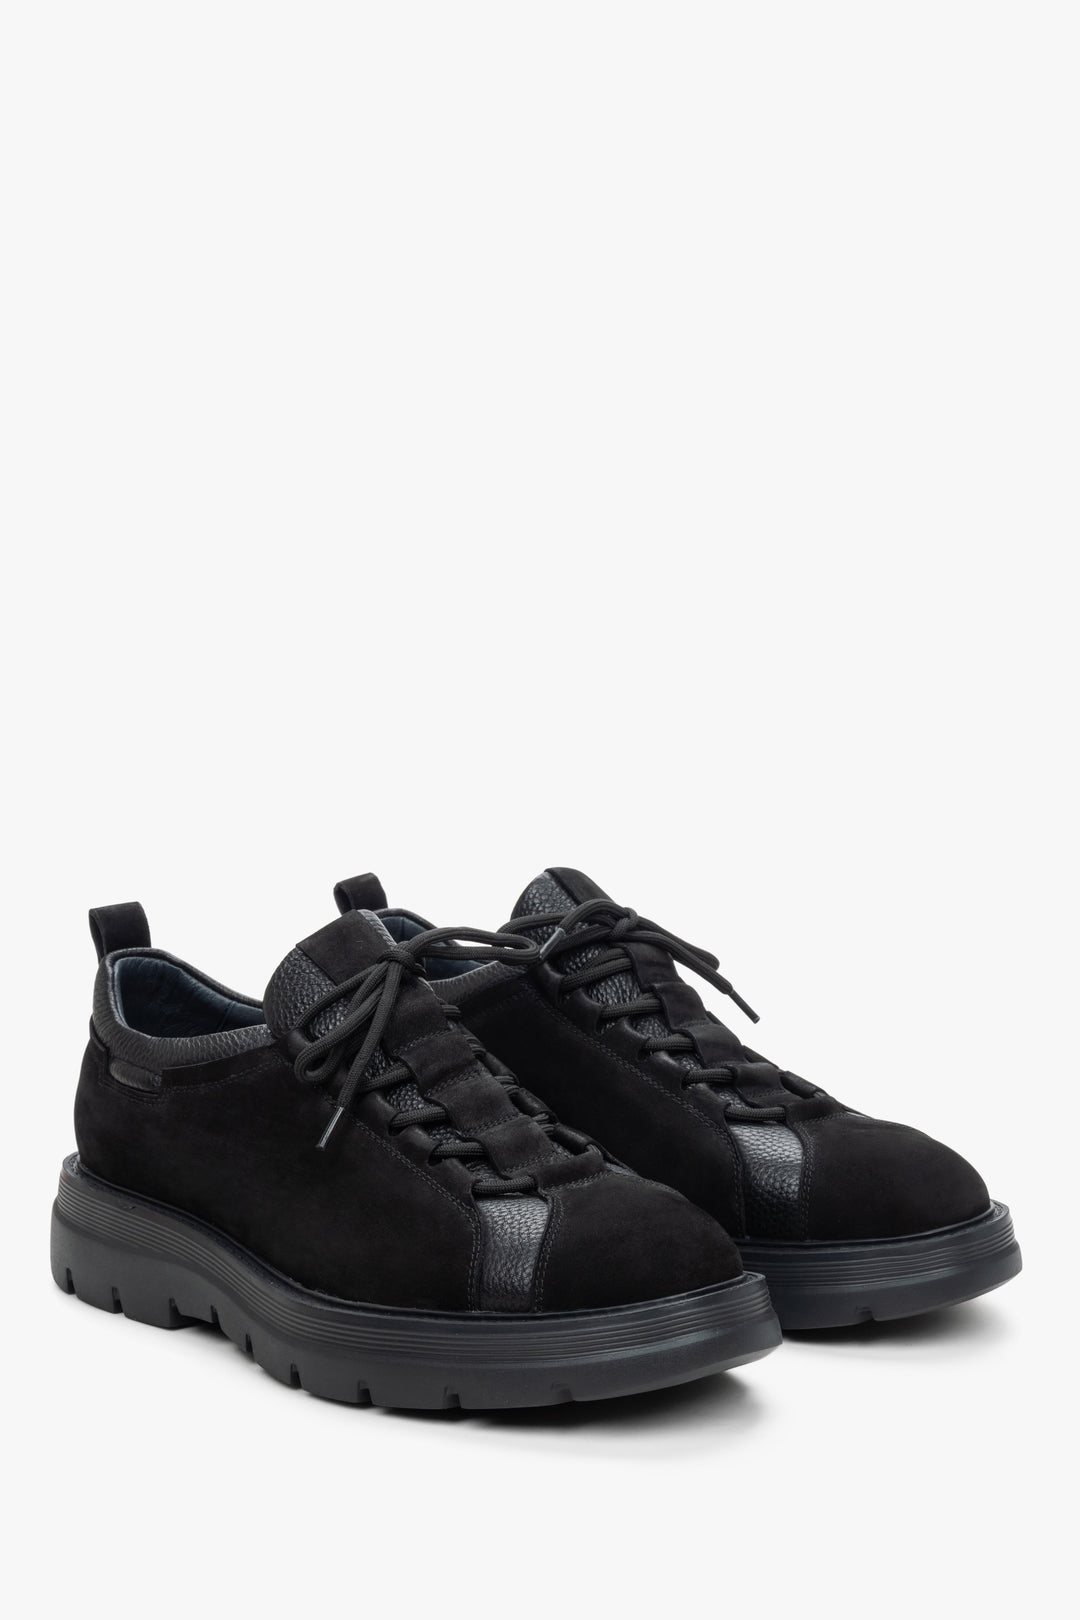 Men's black sneakers made of nubuck and genuine leather by Estro.